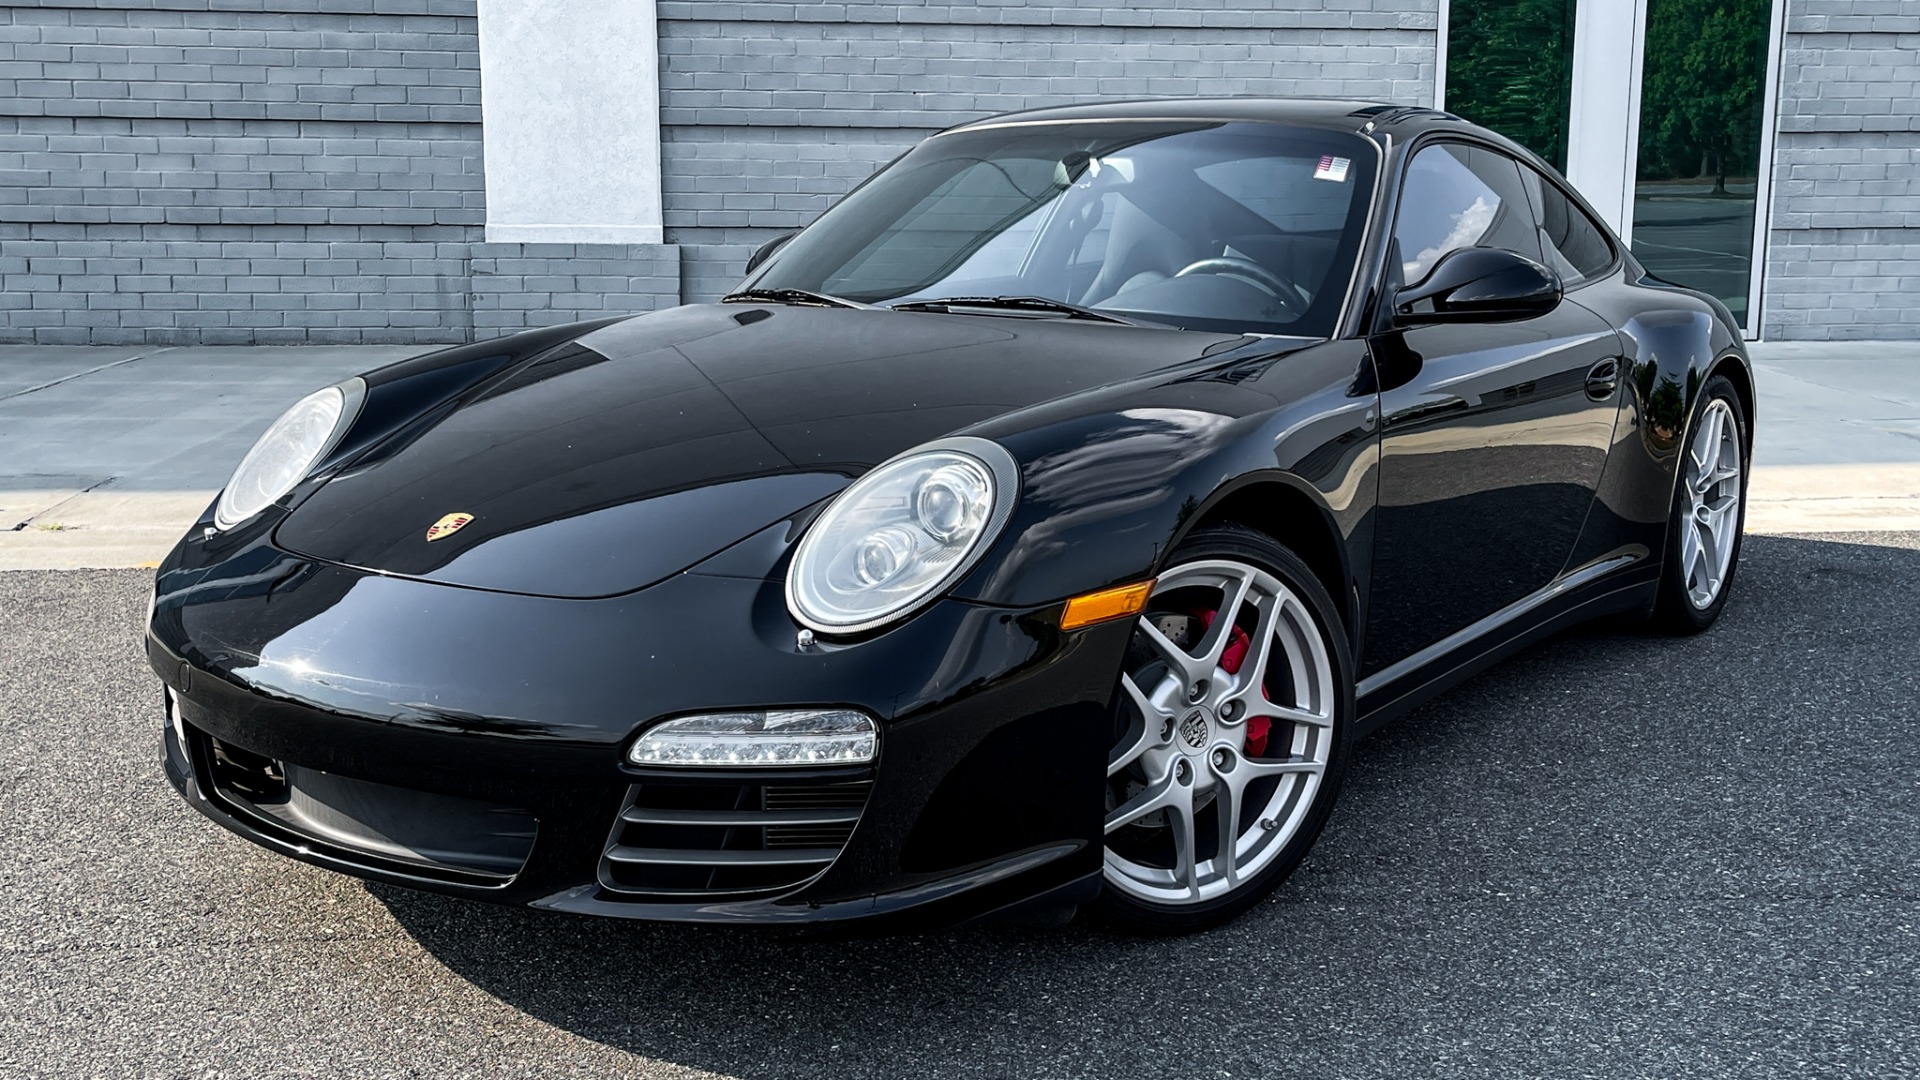 Used 2010 Porsche 911 Carrera 4S / PDK / LEATHER / BLUETOOTH / VENTILATED SEATS / BOSE SOUND for sale $77,995 at Formula Imports in Charlotte NC 28227 1